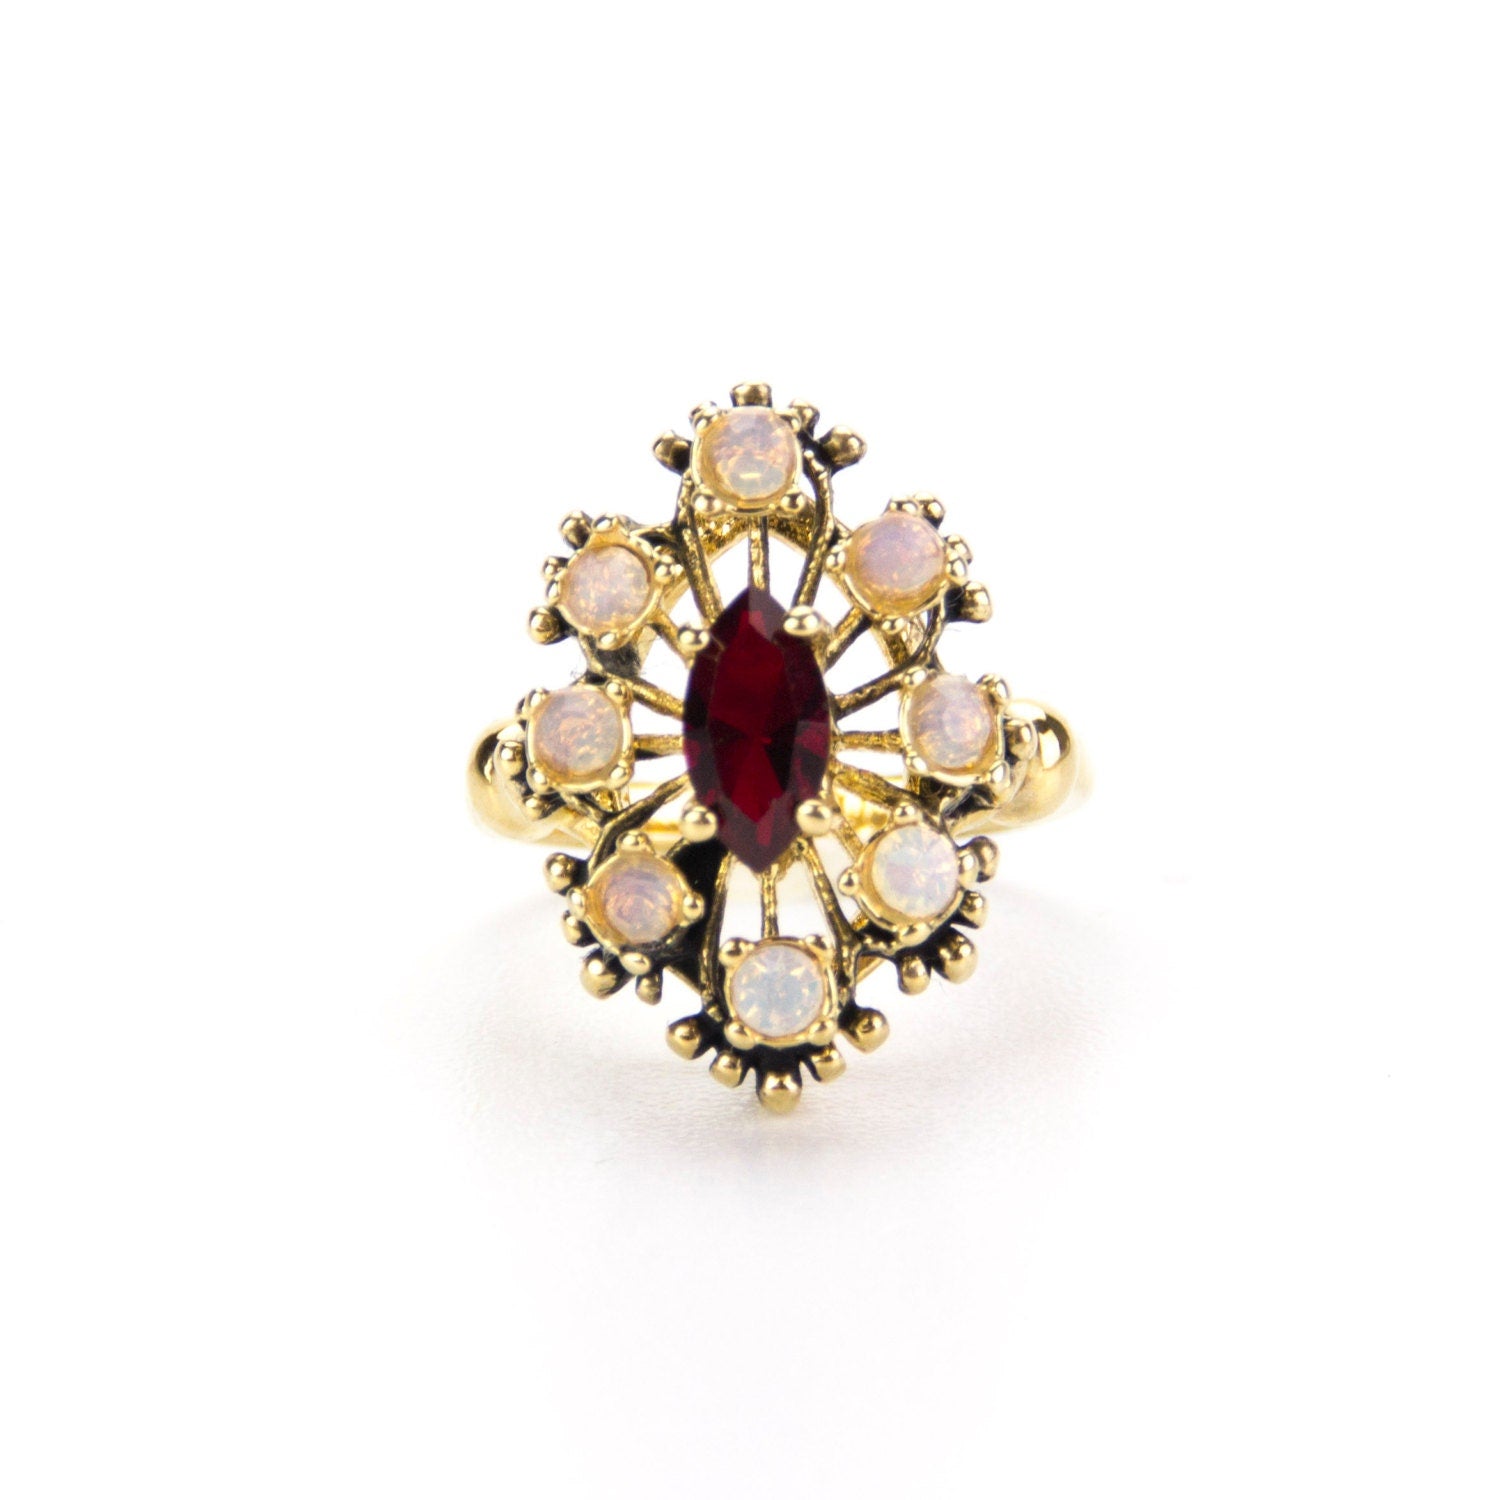 Vintage Filigree Cocktail Ring Ruby Red Swarovski Crystal and Pinfire Opals Edwardian Style Antique Jewelry 18k Gold  #R250 - LIMITED SUPPLY